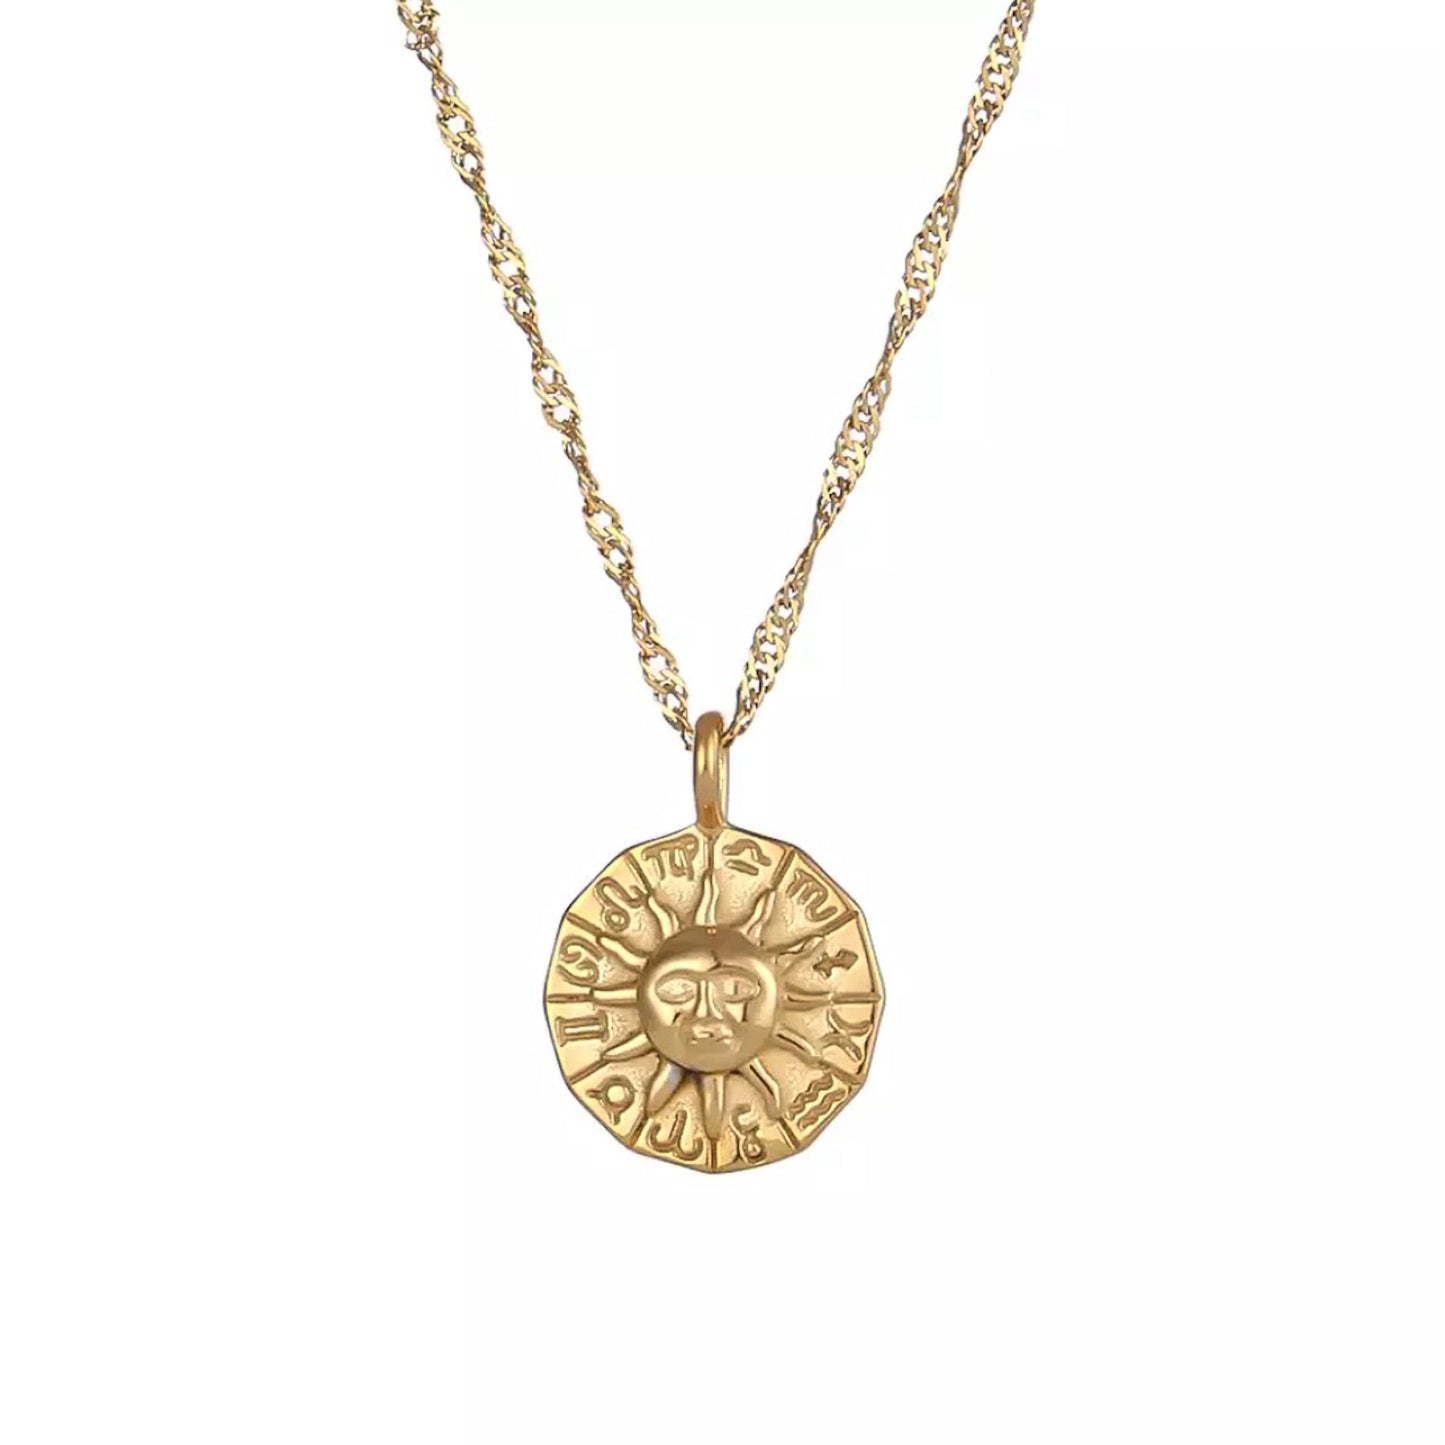 Sidereal Pendant Necklace│18k Gold Plated